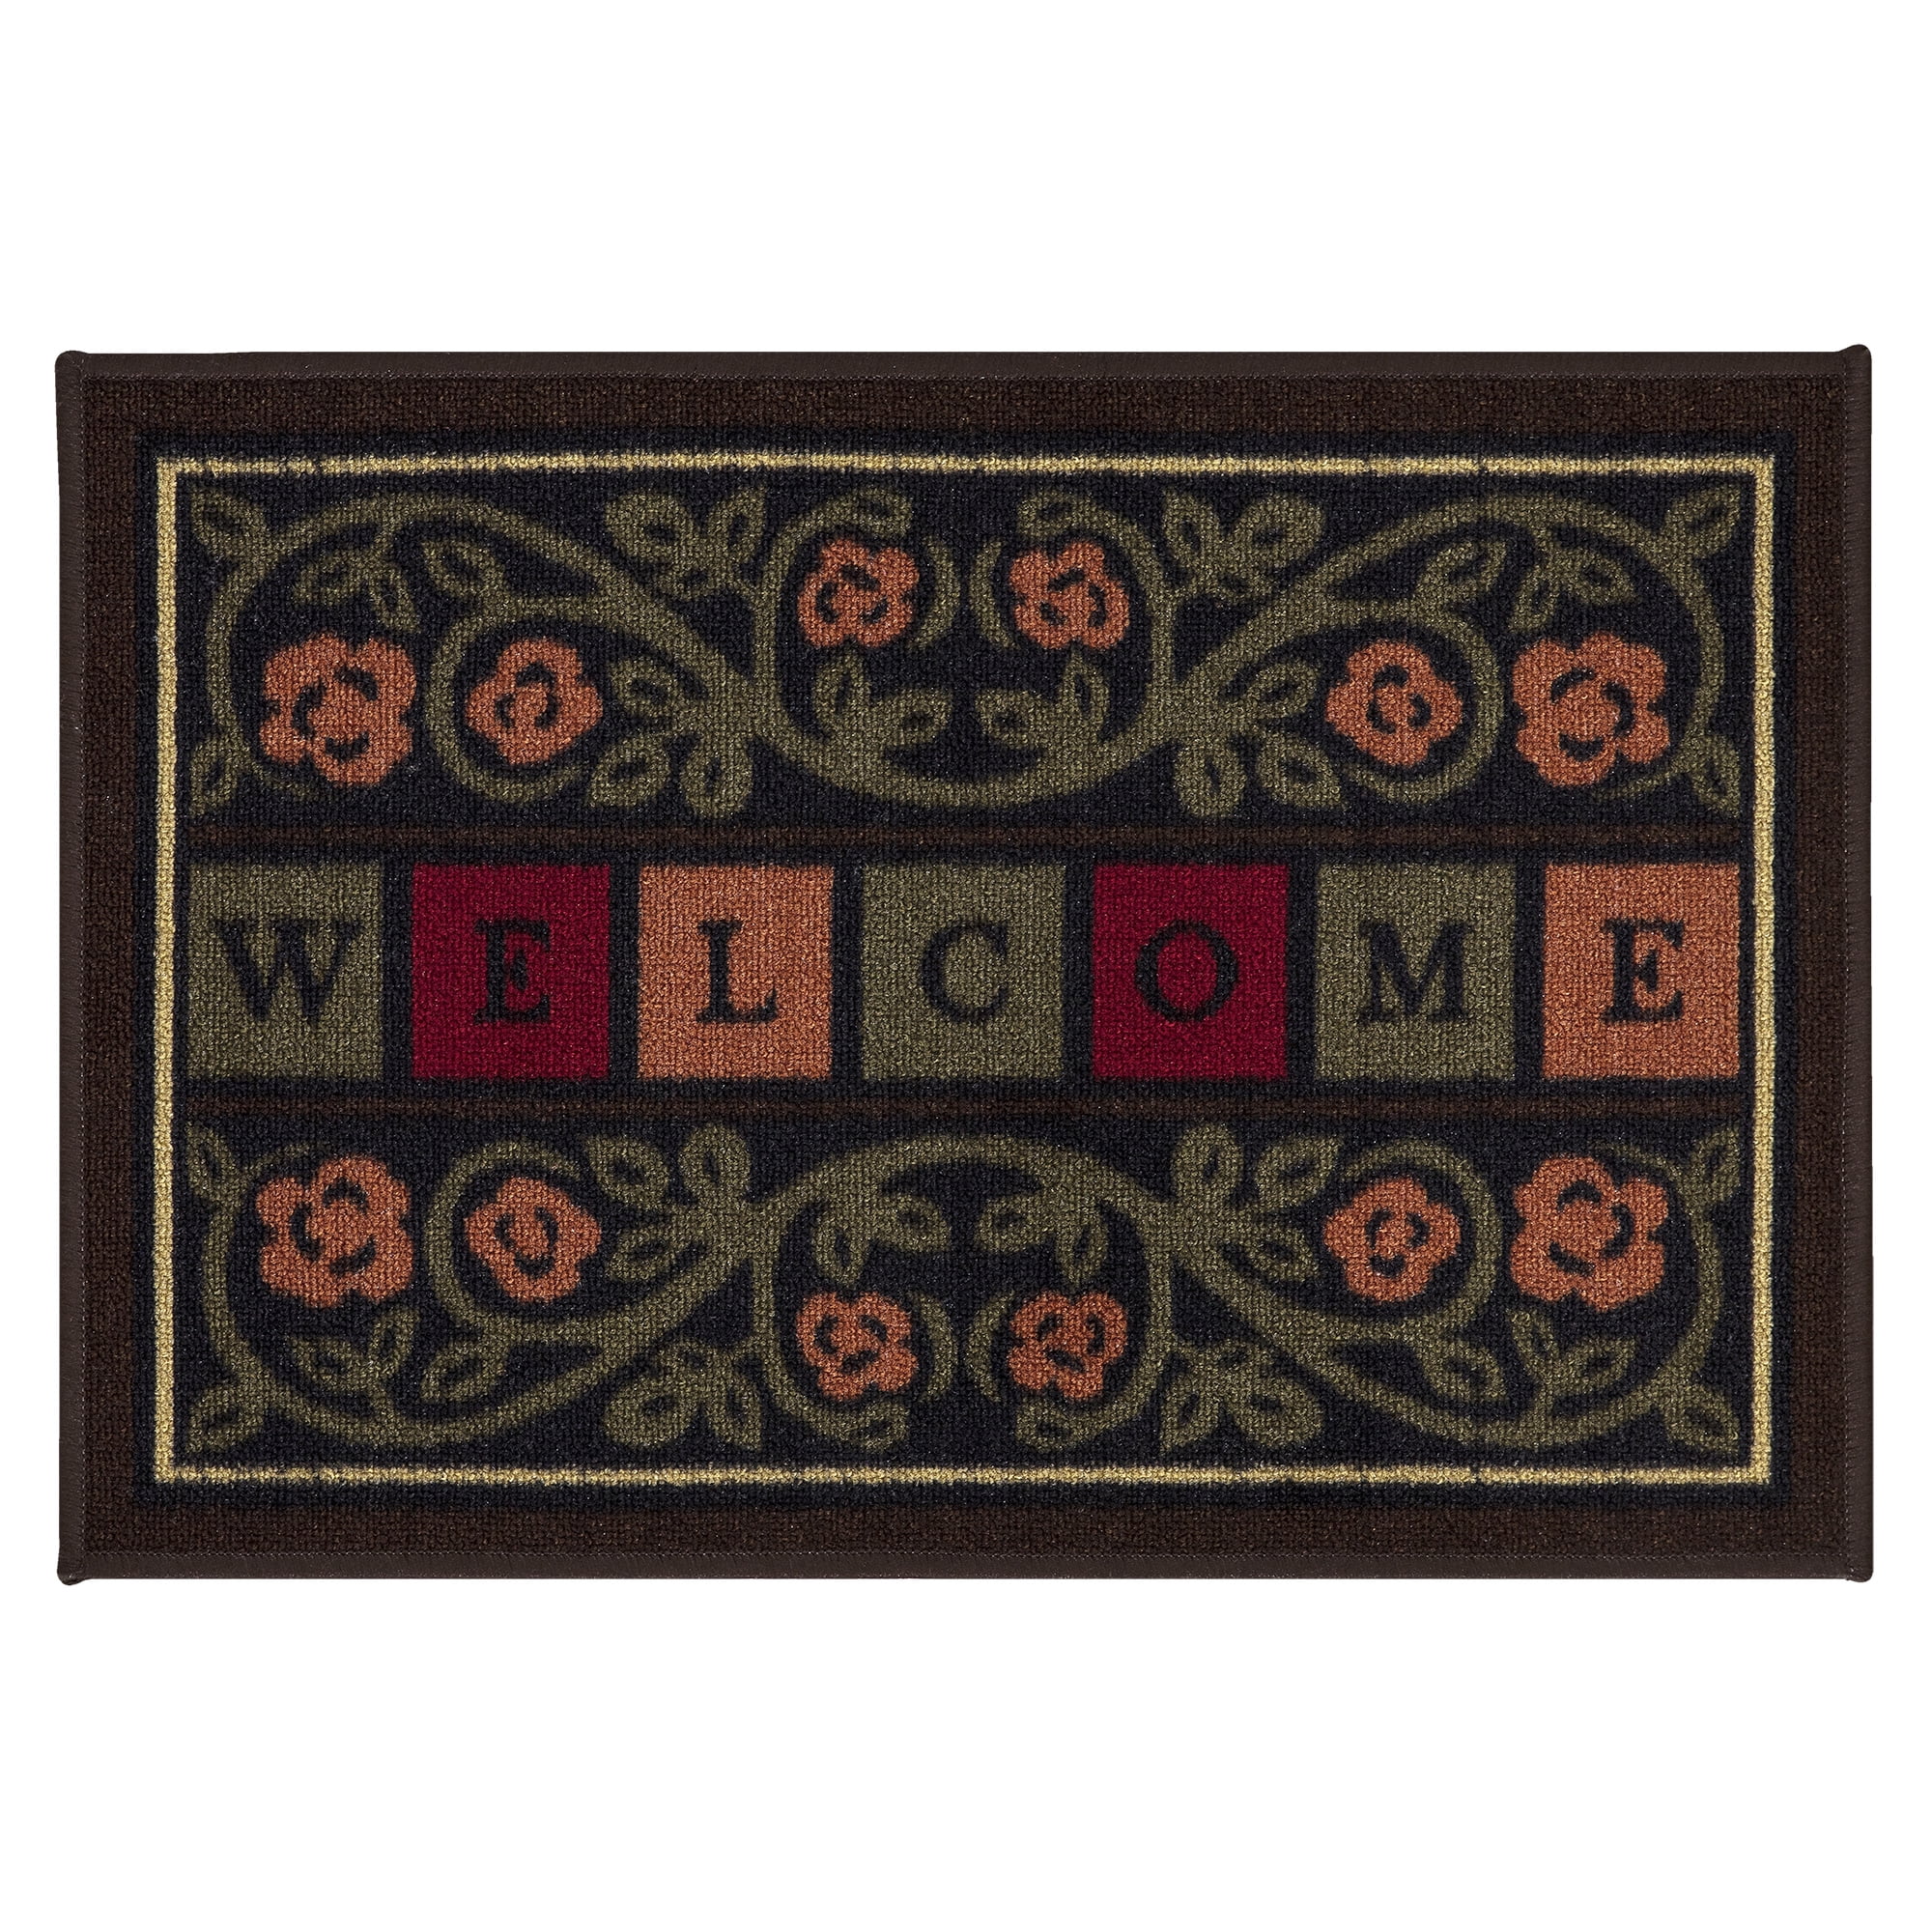 New Heavy Rubber Outdoor Christmas Gingerbread Door Mat Rug Recycled Rbr 18x30 